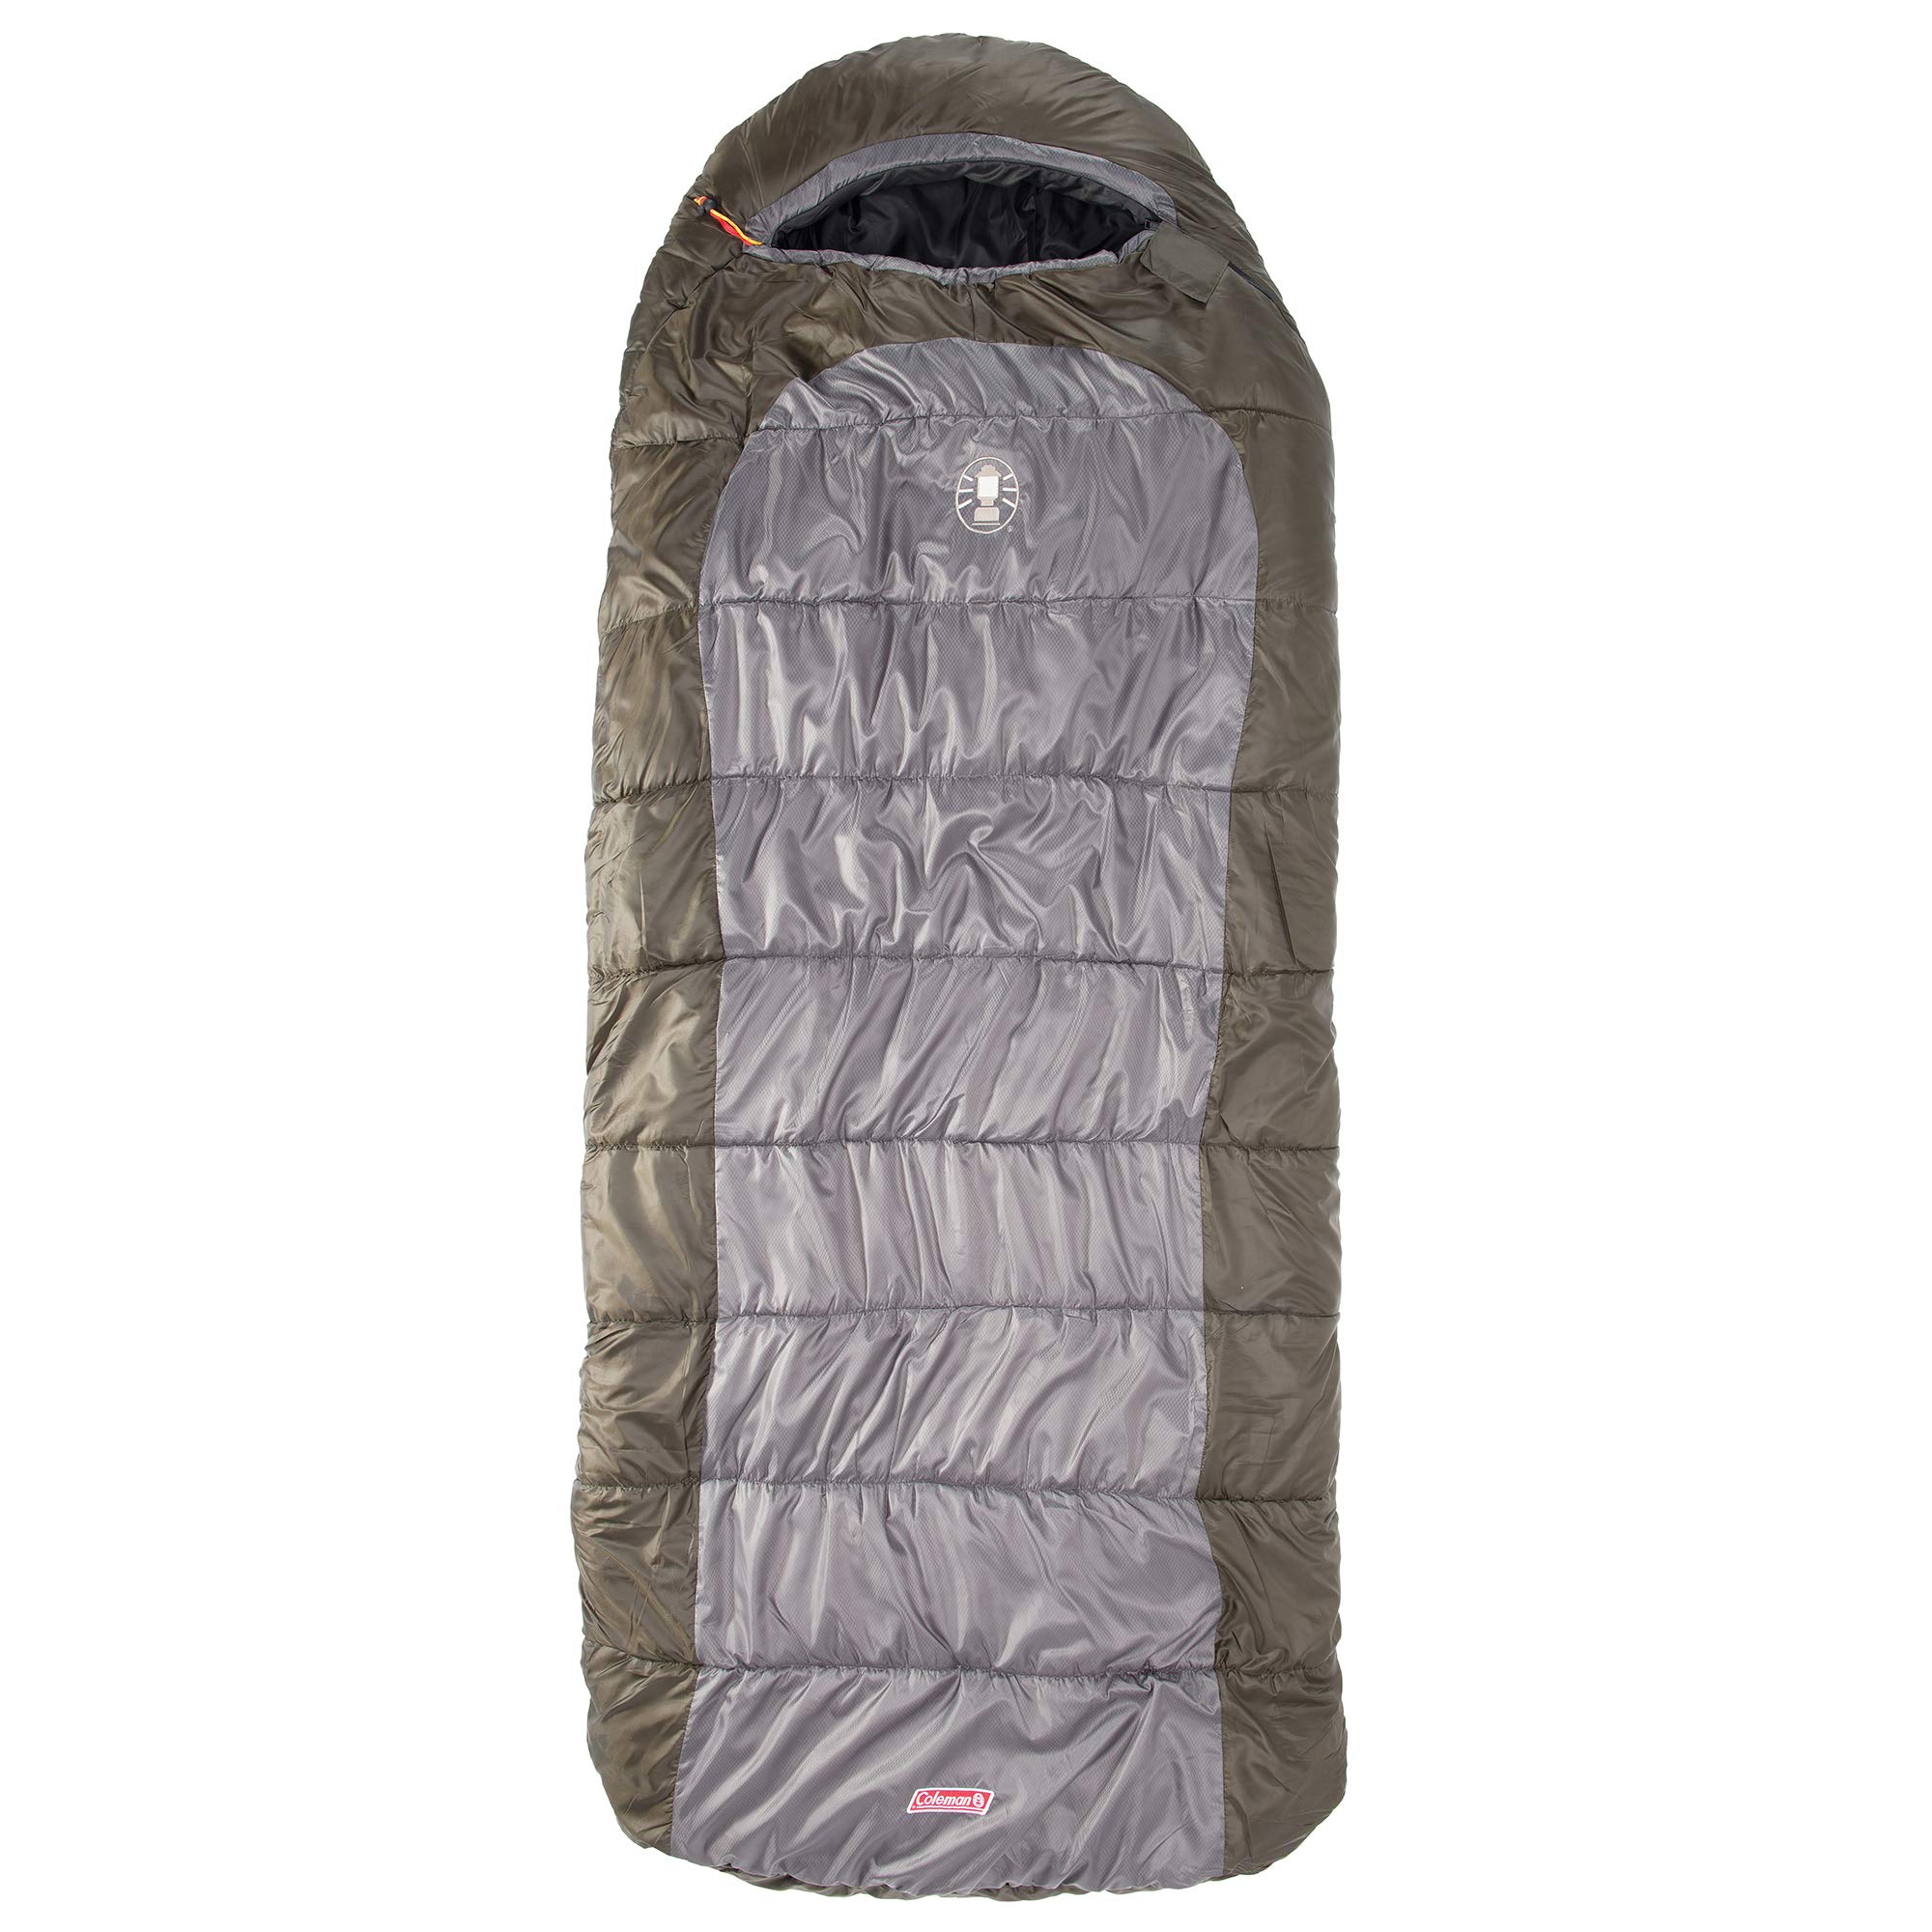 Coleman Big Basin Cold-Weather Sleeping Bag, 15F Big & Tall Camping  Sleeping Bag for Adults, Adjustable Hood and Fleece-Lined Footbox for  Warmth and Ventilation, Fits Adults up to 6ft 6in Tall